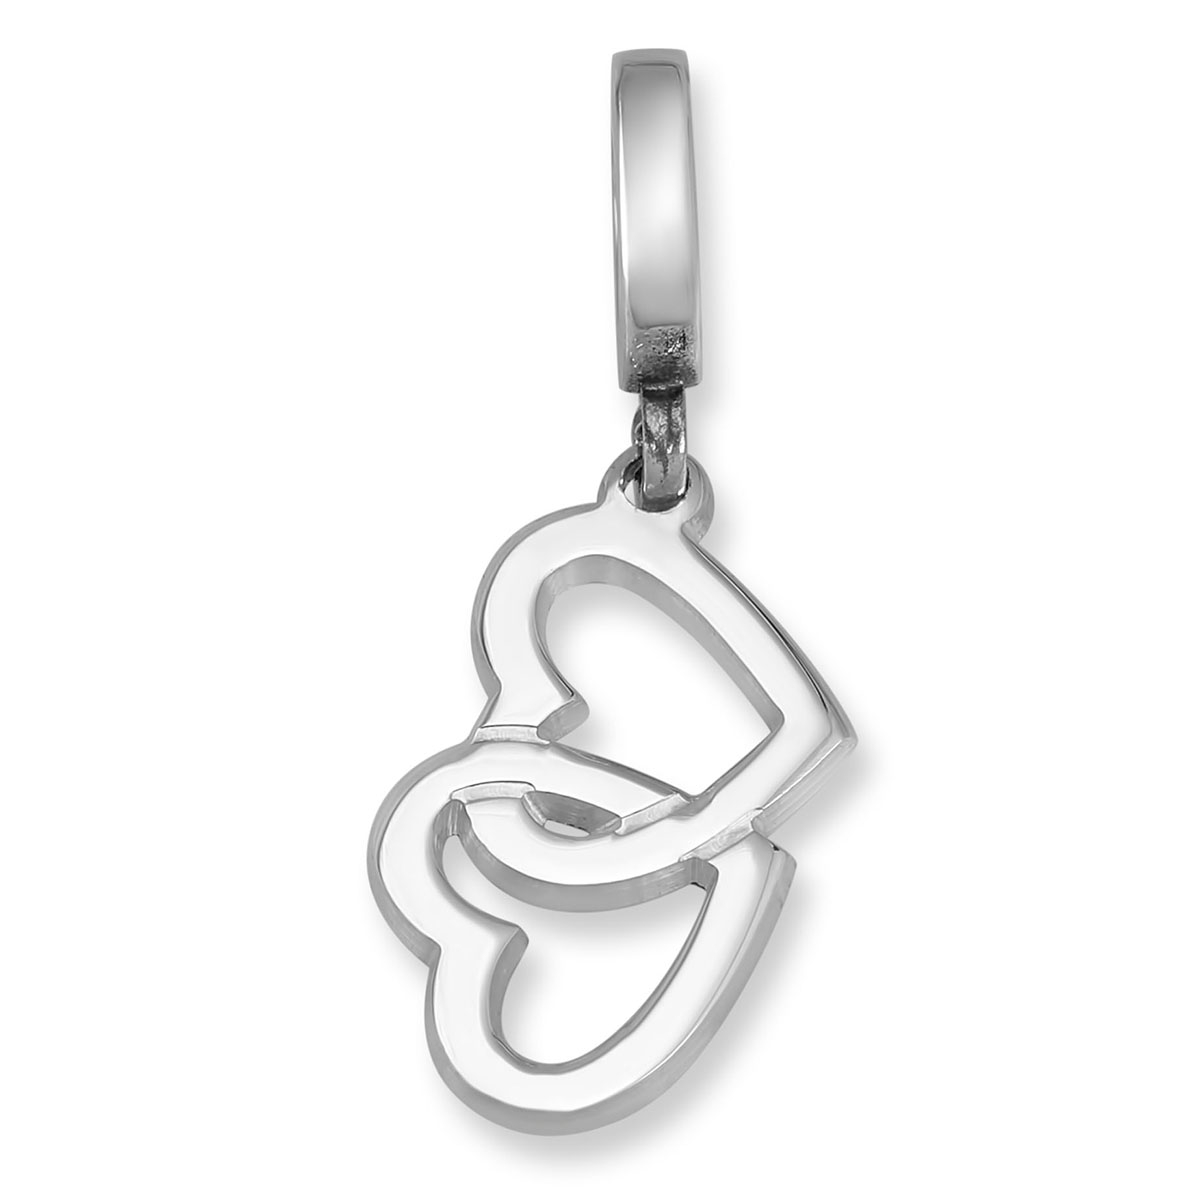 Double Heart Sterling Silver Charm - 1